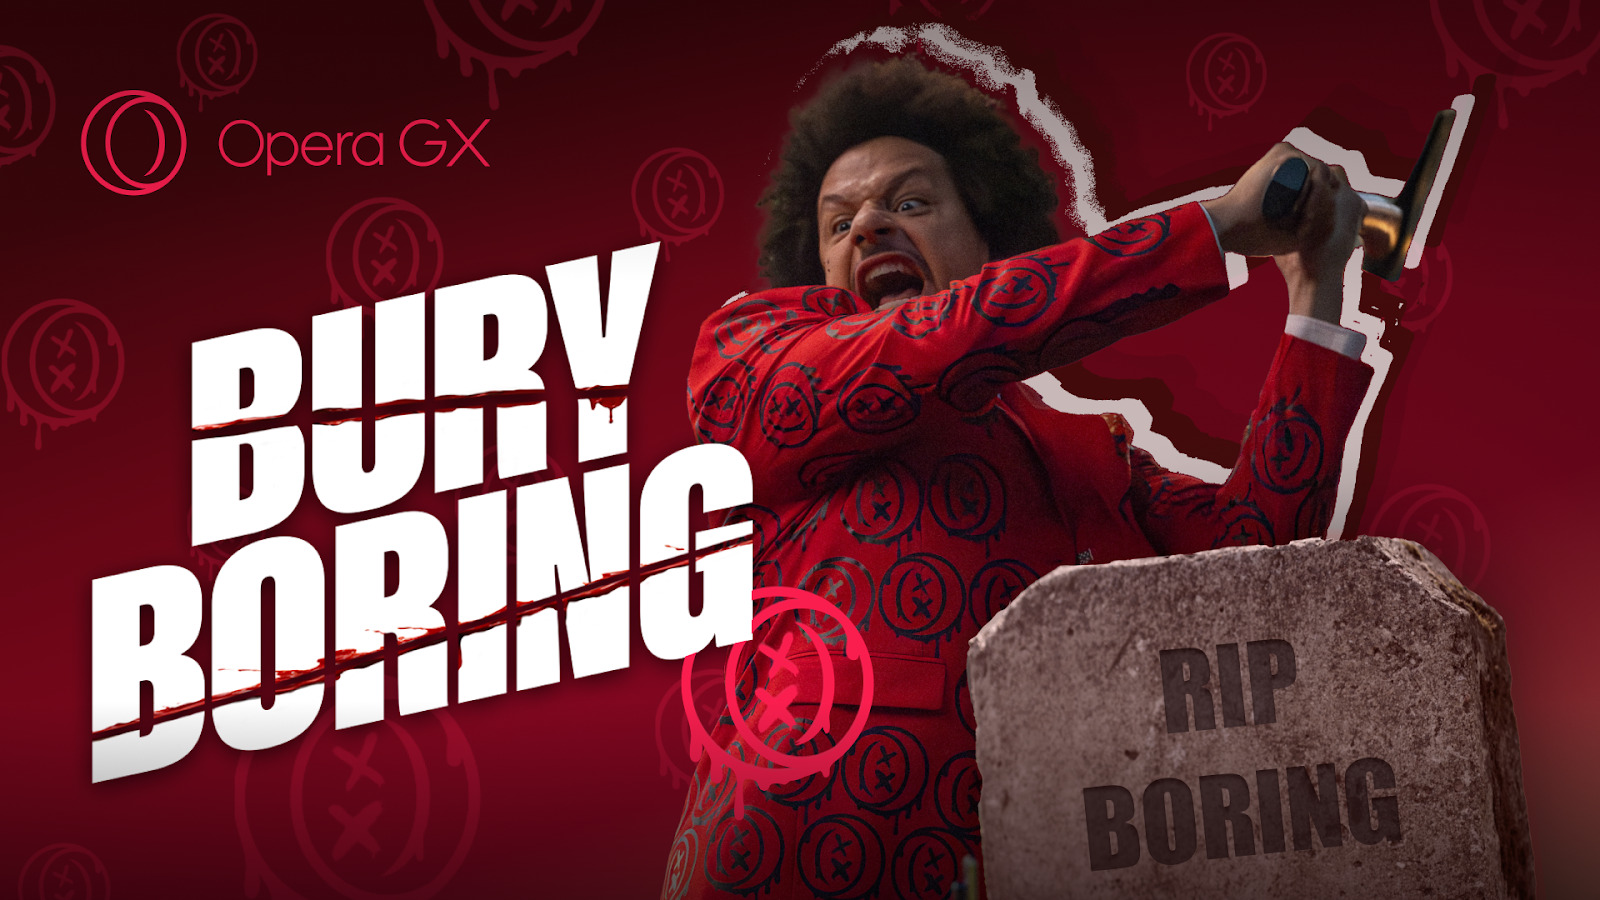 Eric Andre wields his ax to destroy boring browsers.